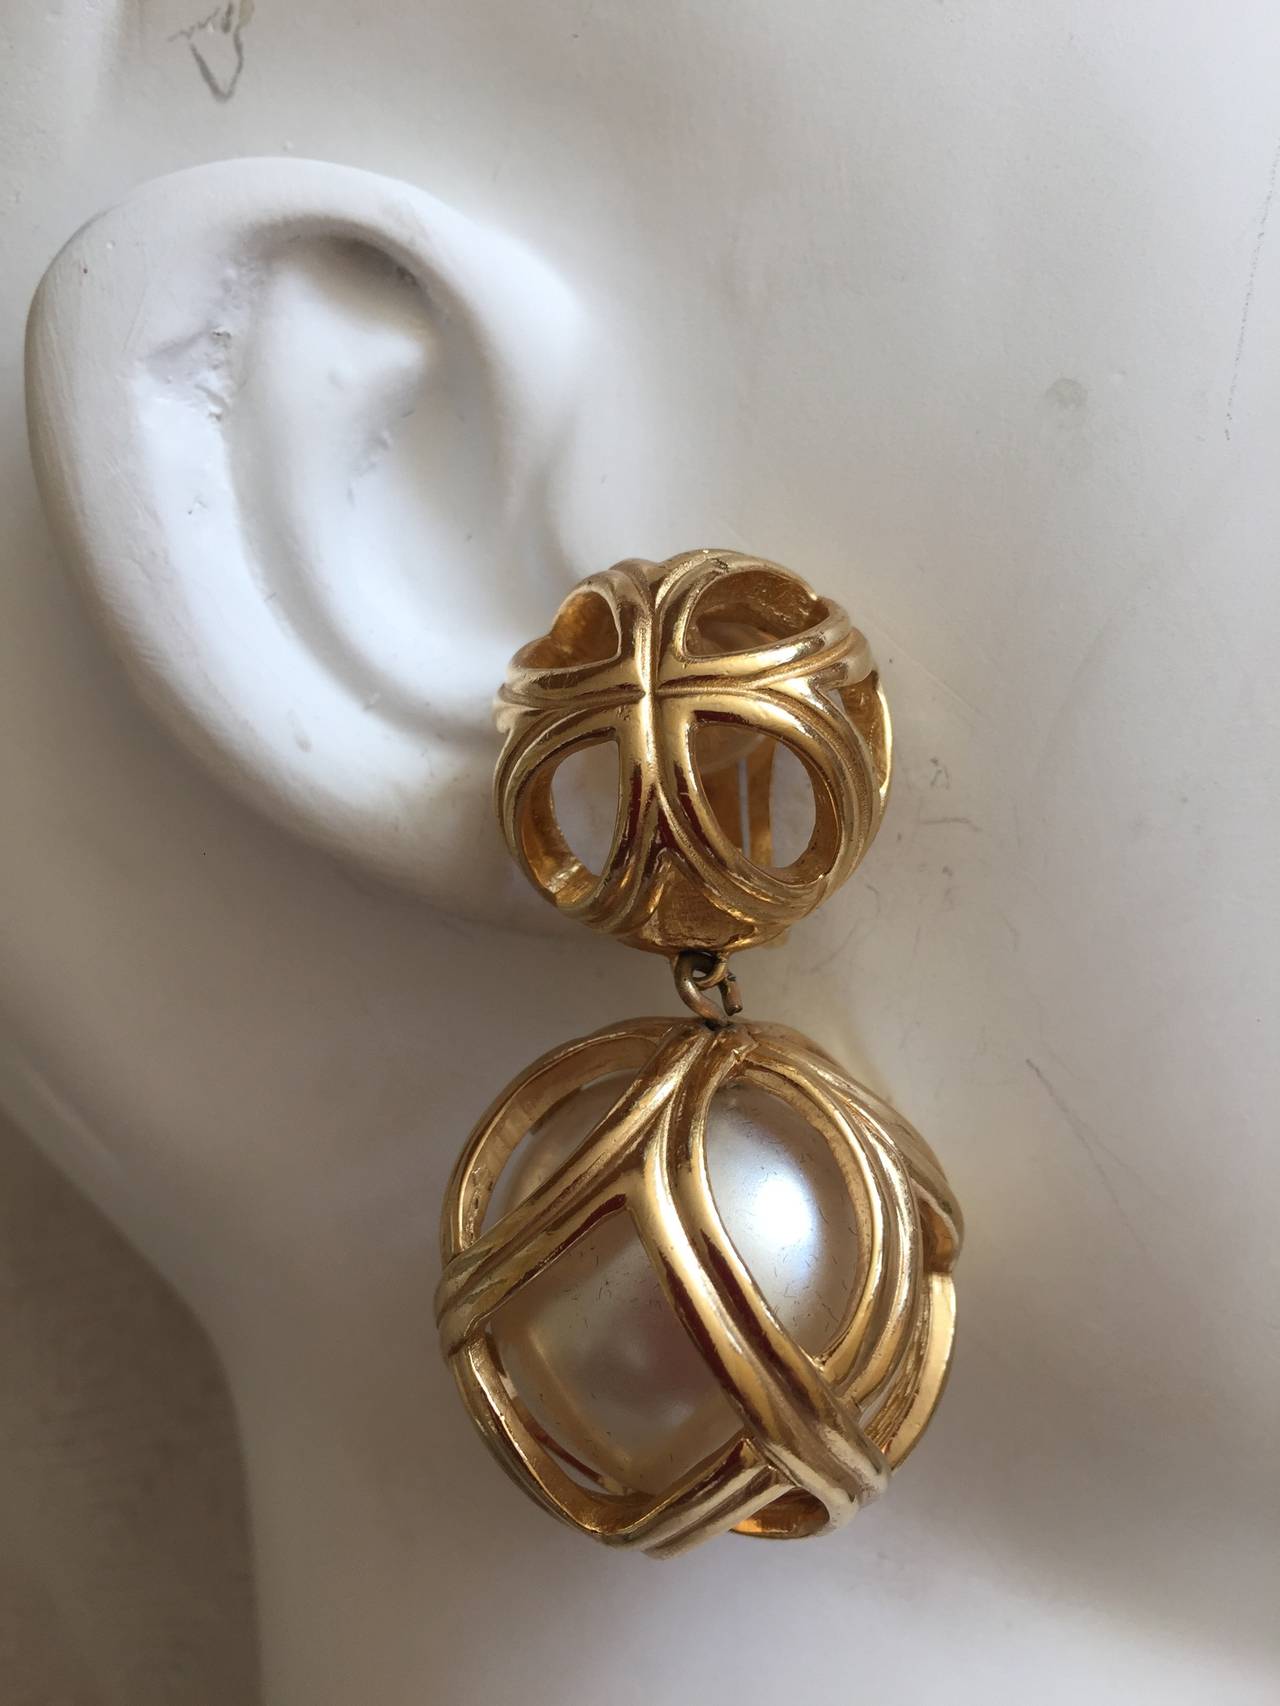 Christian Dior by Grosse Pearl Cage Drop Earrings.
Clip earrings with a dangling cage suspending a large pearl, so chic.